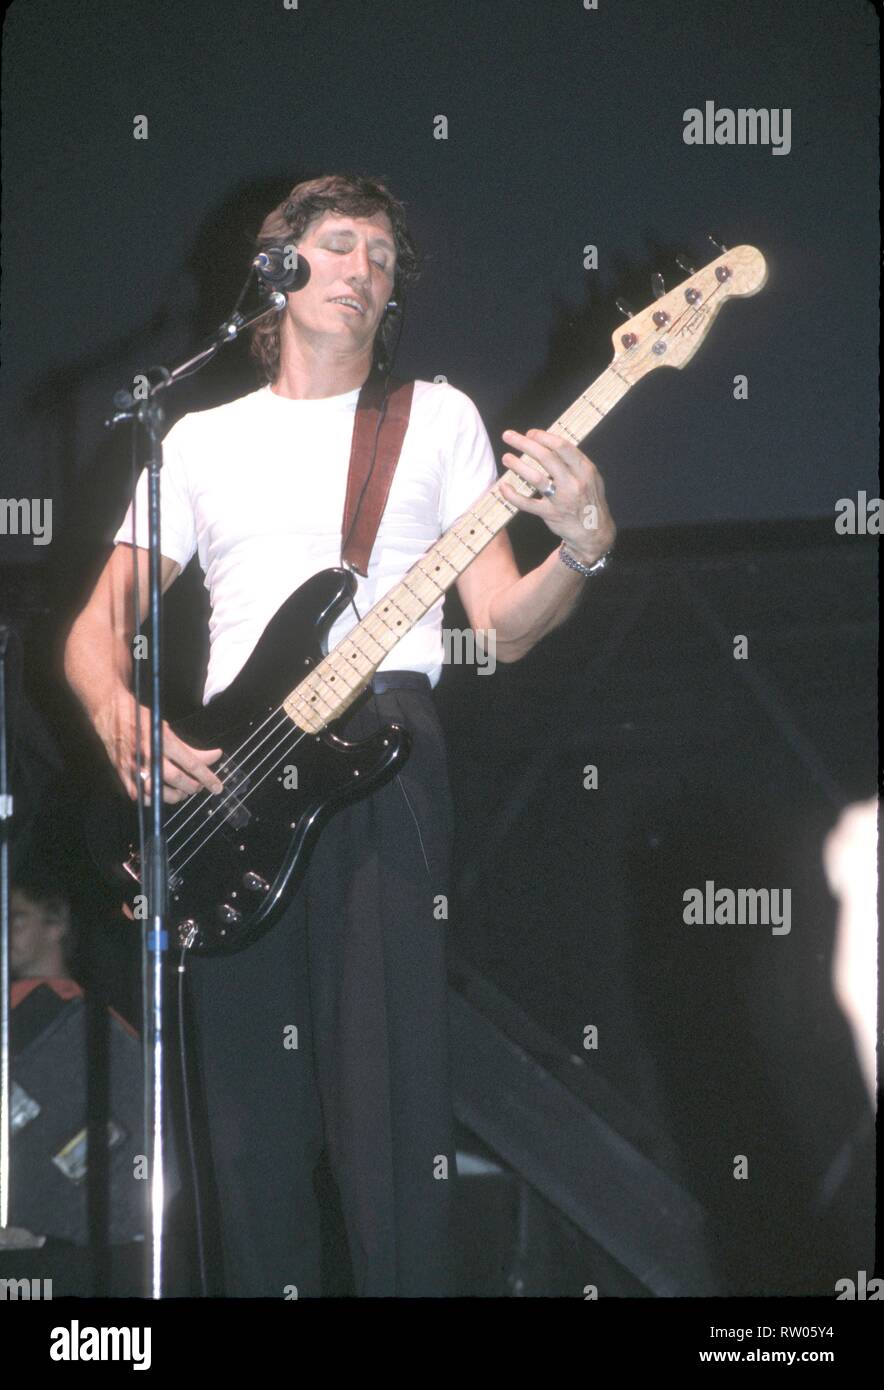 Singer, songwriter and bassist Roger Waters, best known as the bass player and one of the main songwriters in the rock band Pink Floyd, is shown performing on stage during a "live" concert appearance. Stock Photo